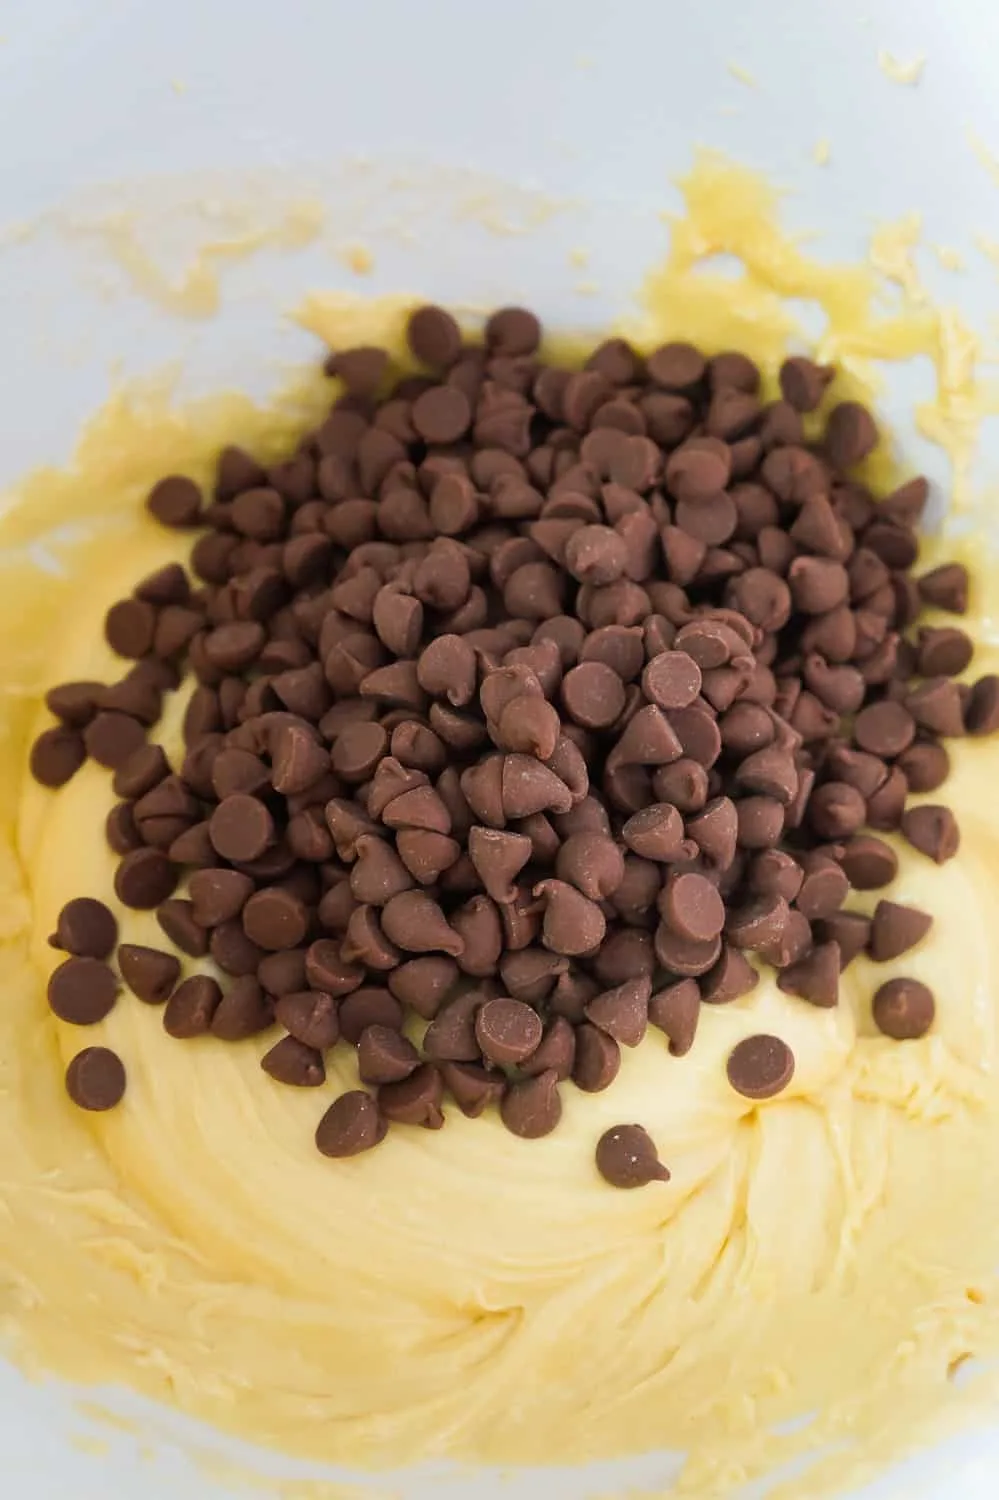 milk chocolate chips on top of cake batter in a mixing bowl